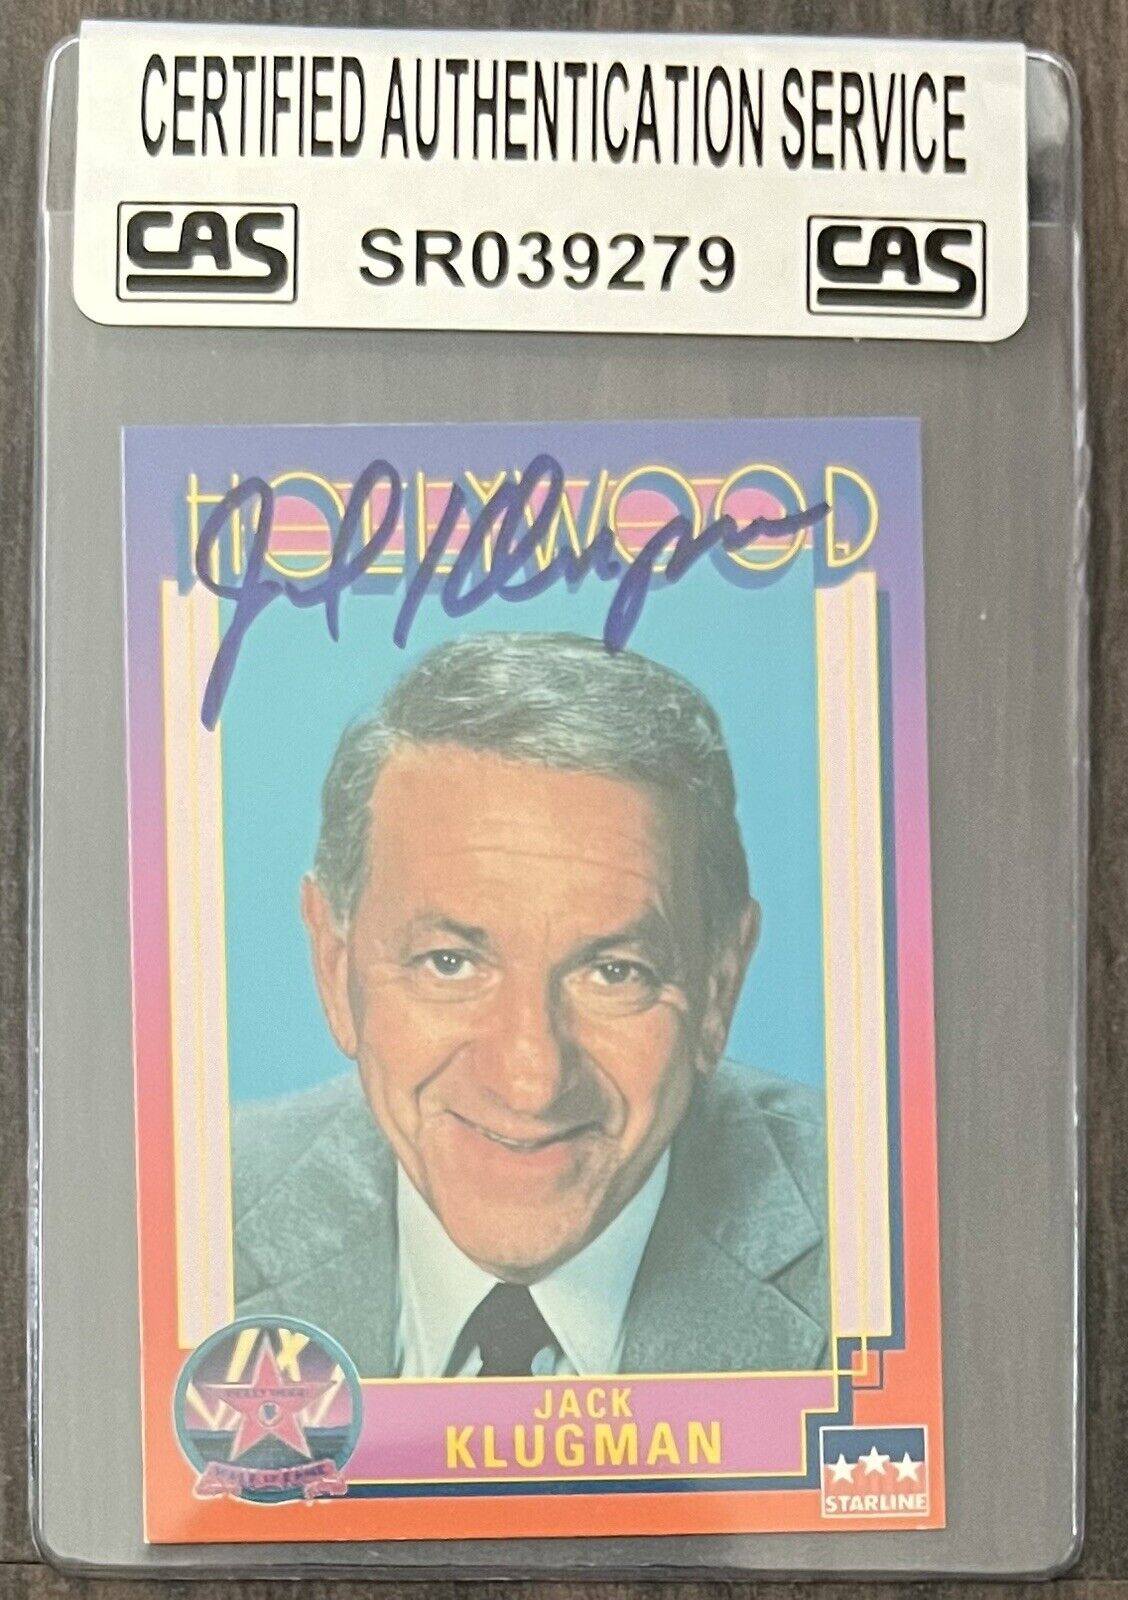 Jack Klugman Autographed Card (Certified Authentic)